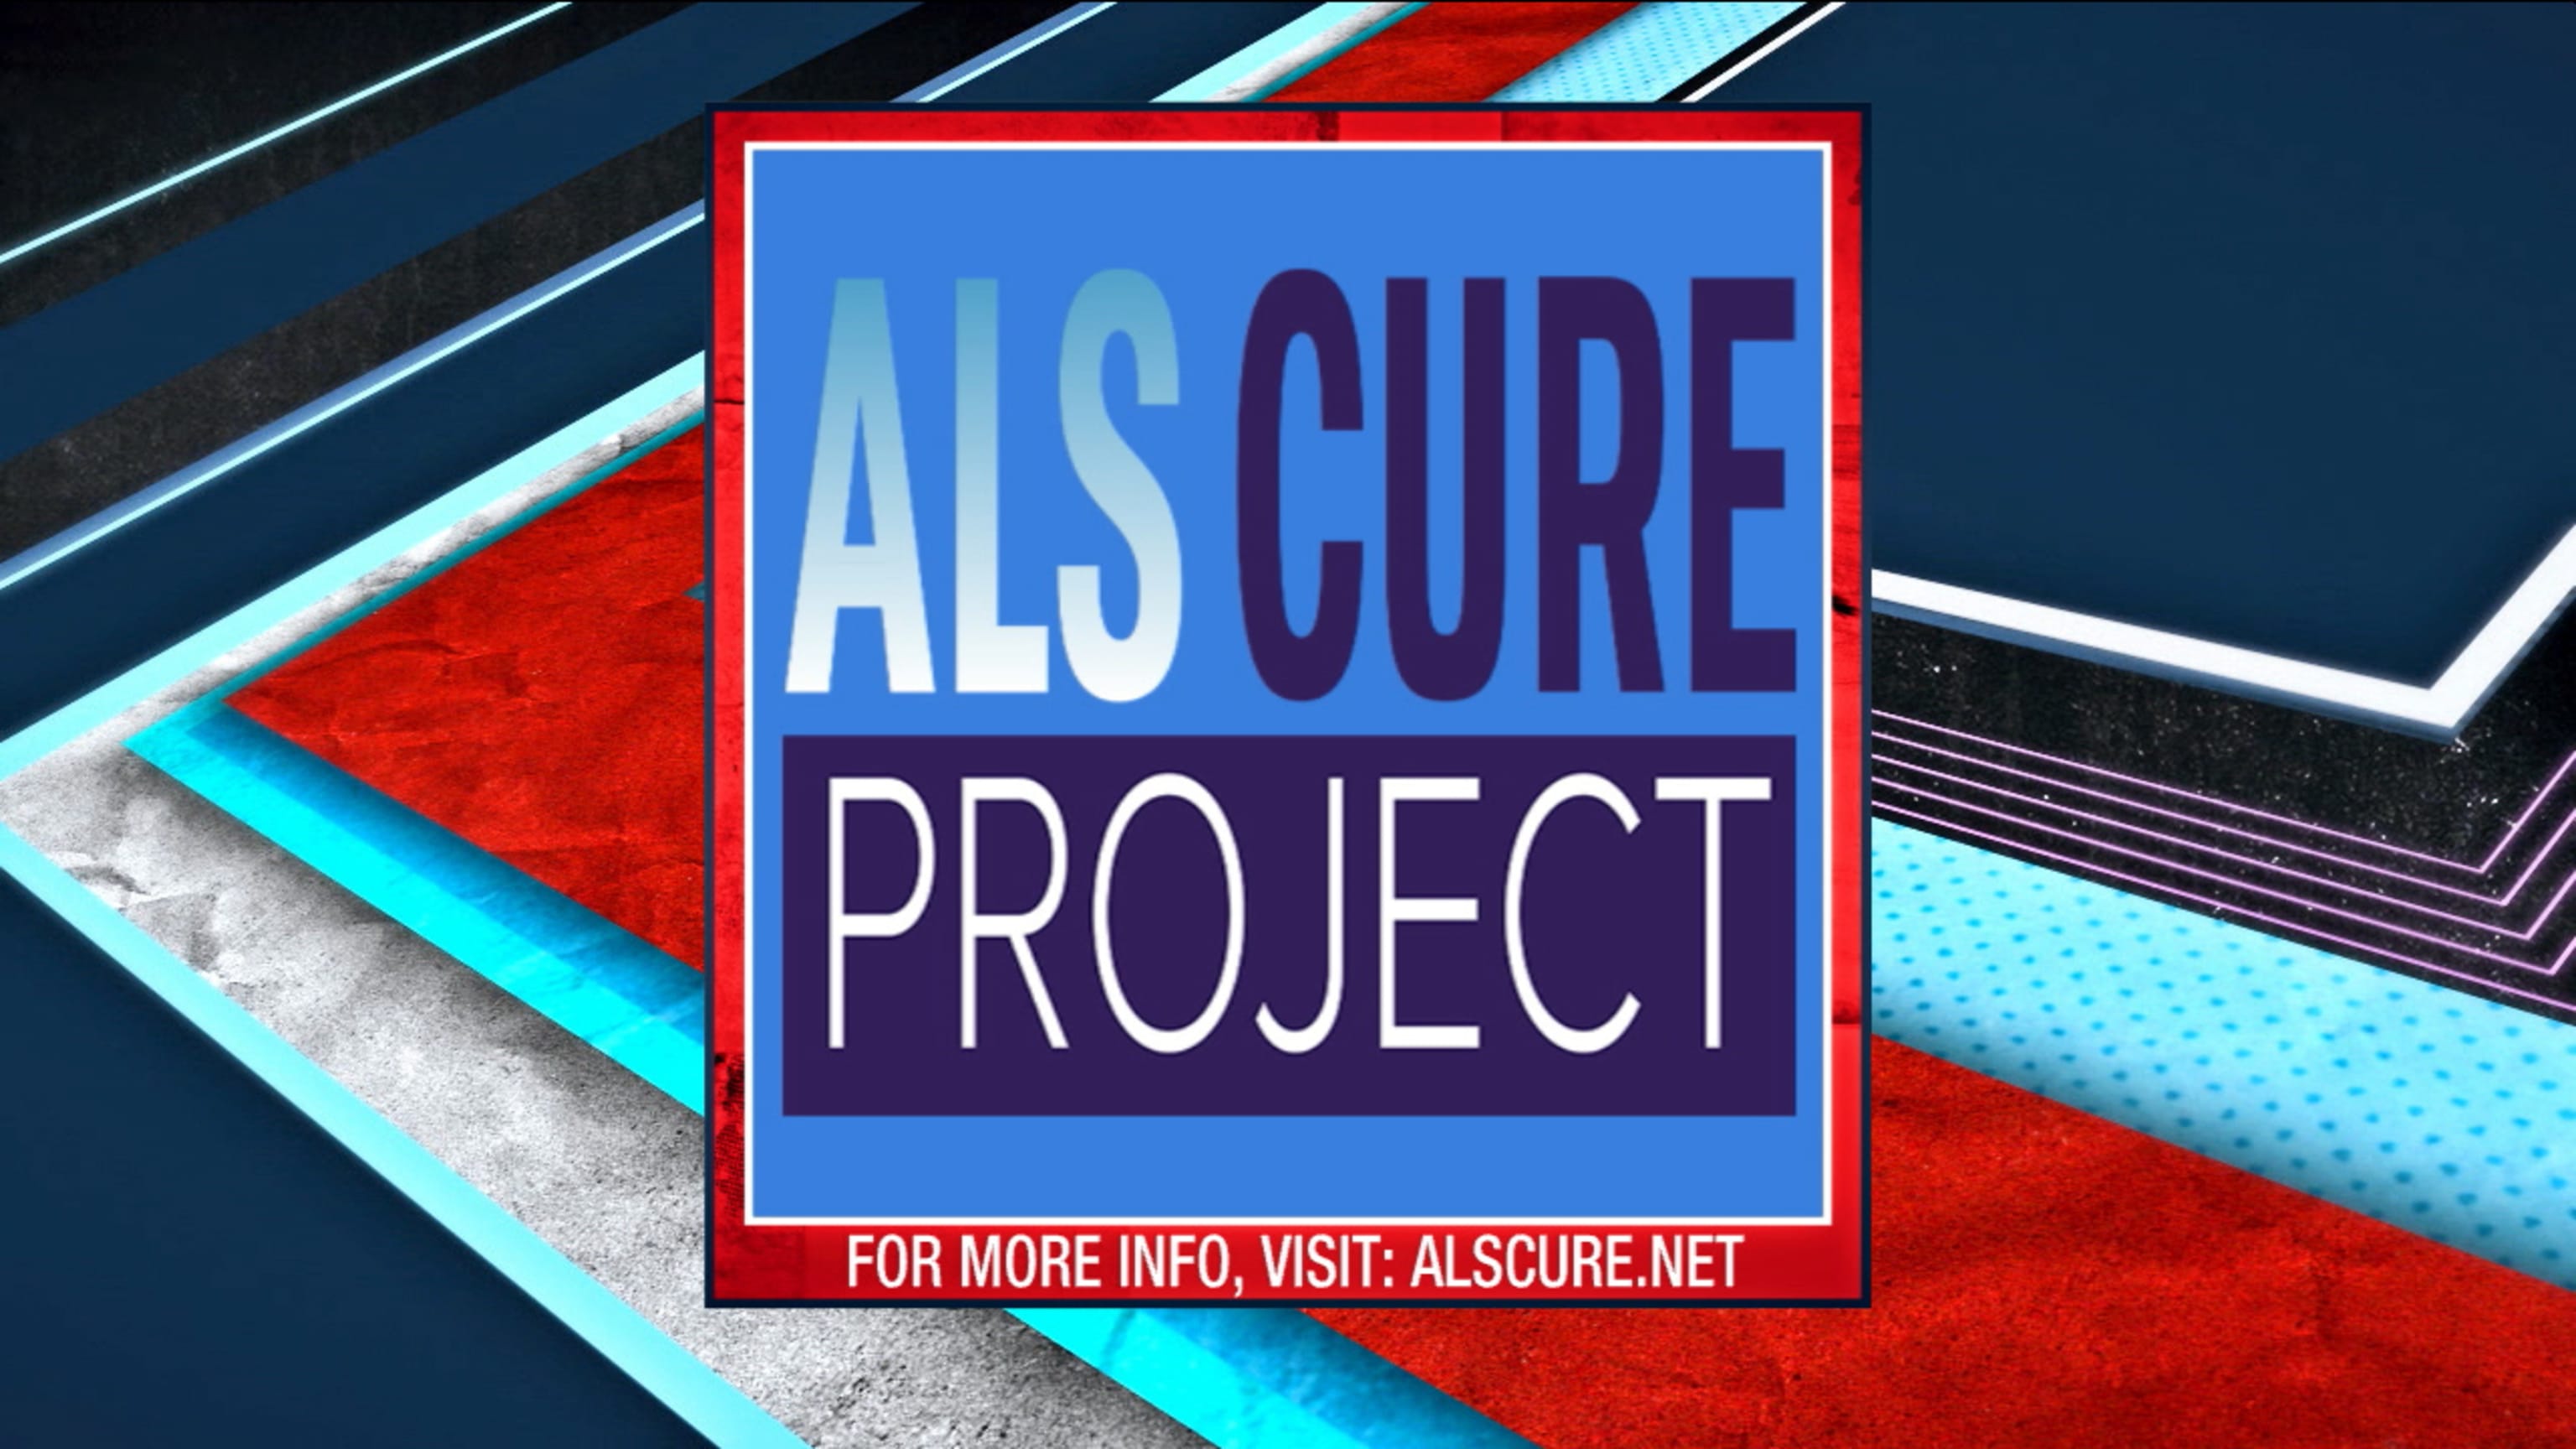 MLB Raise Funds And Awareness For ALS During First Lou Gehrig Day